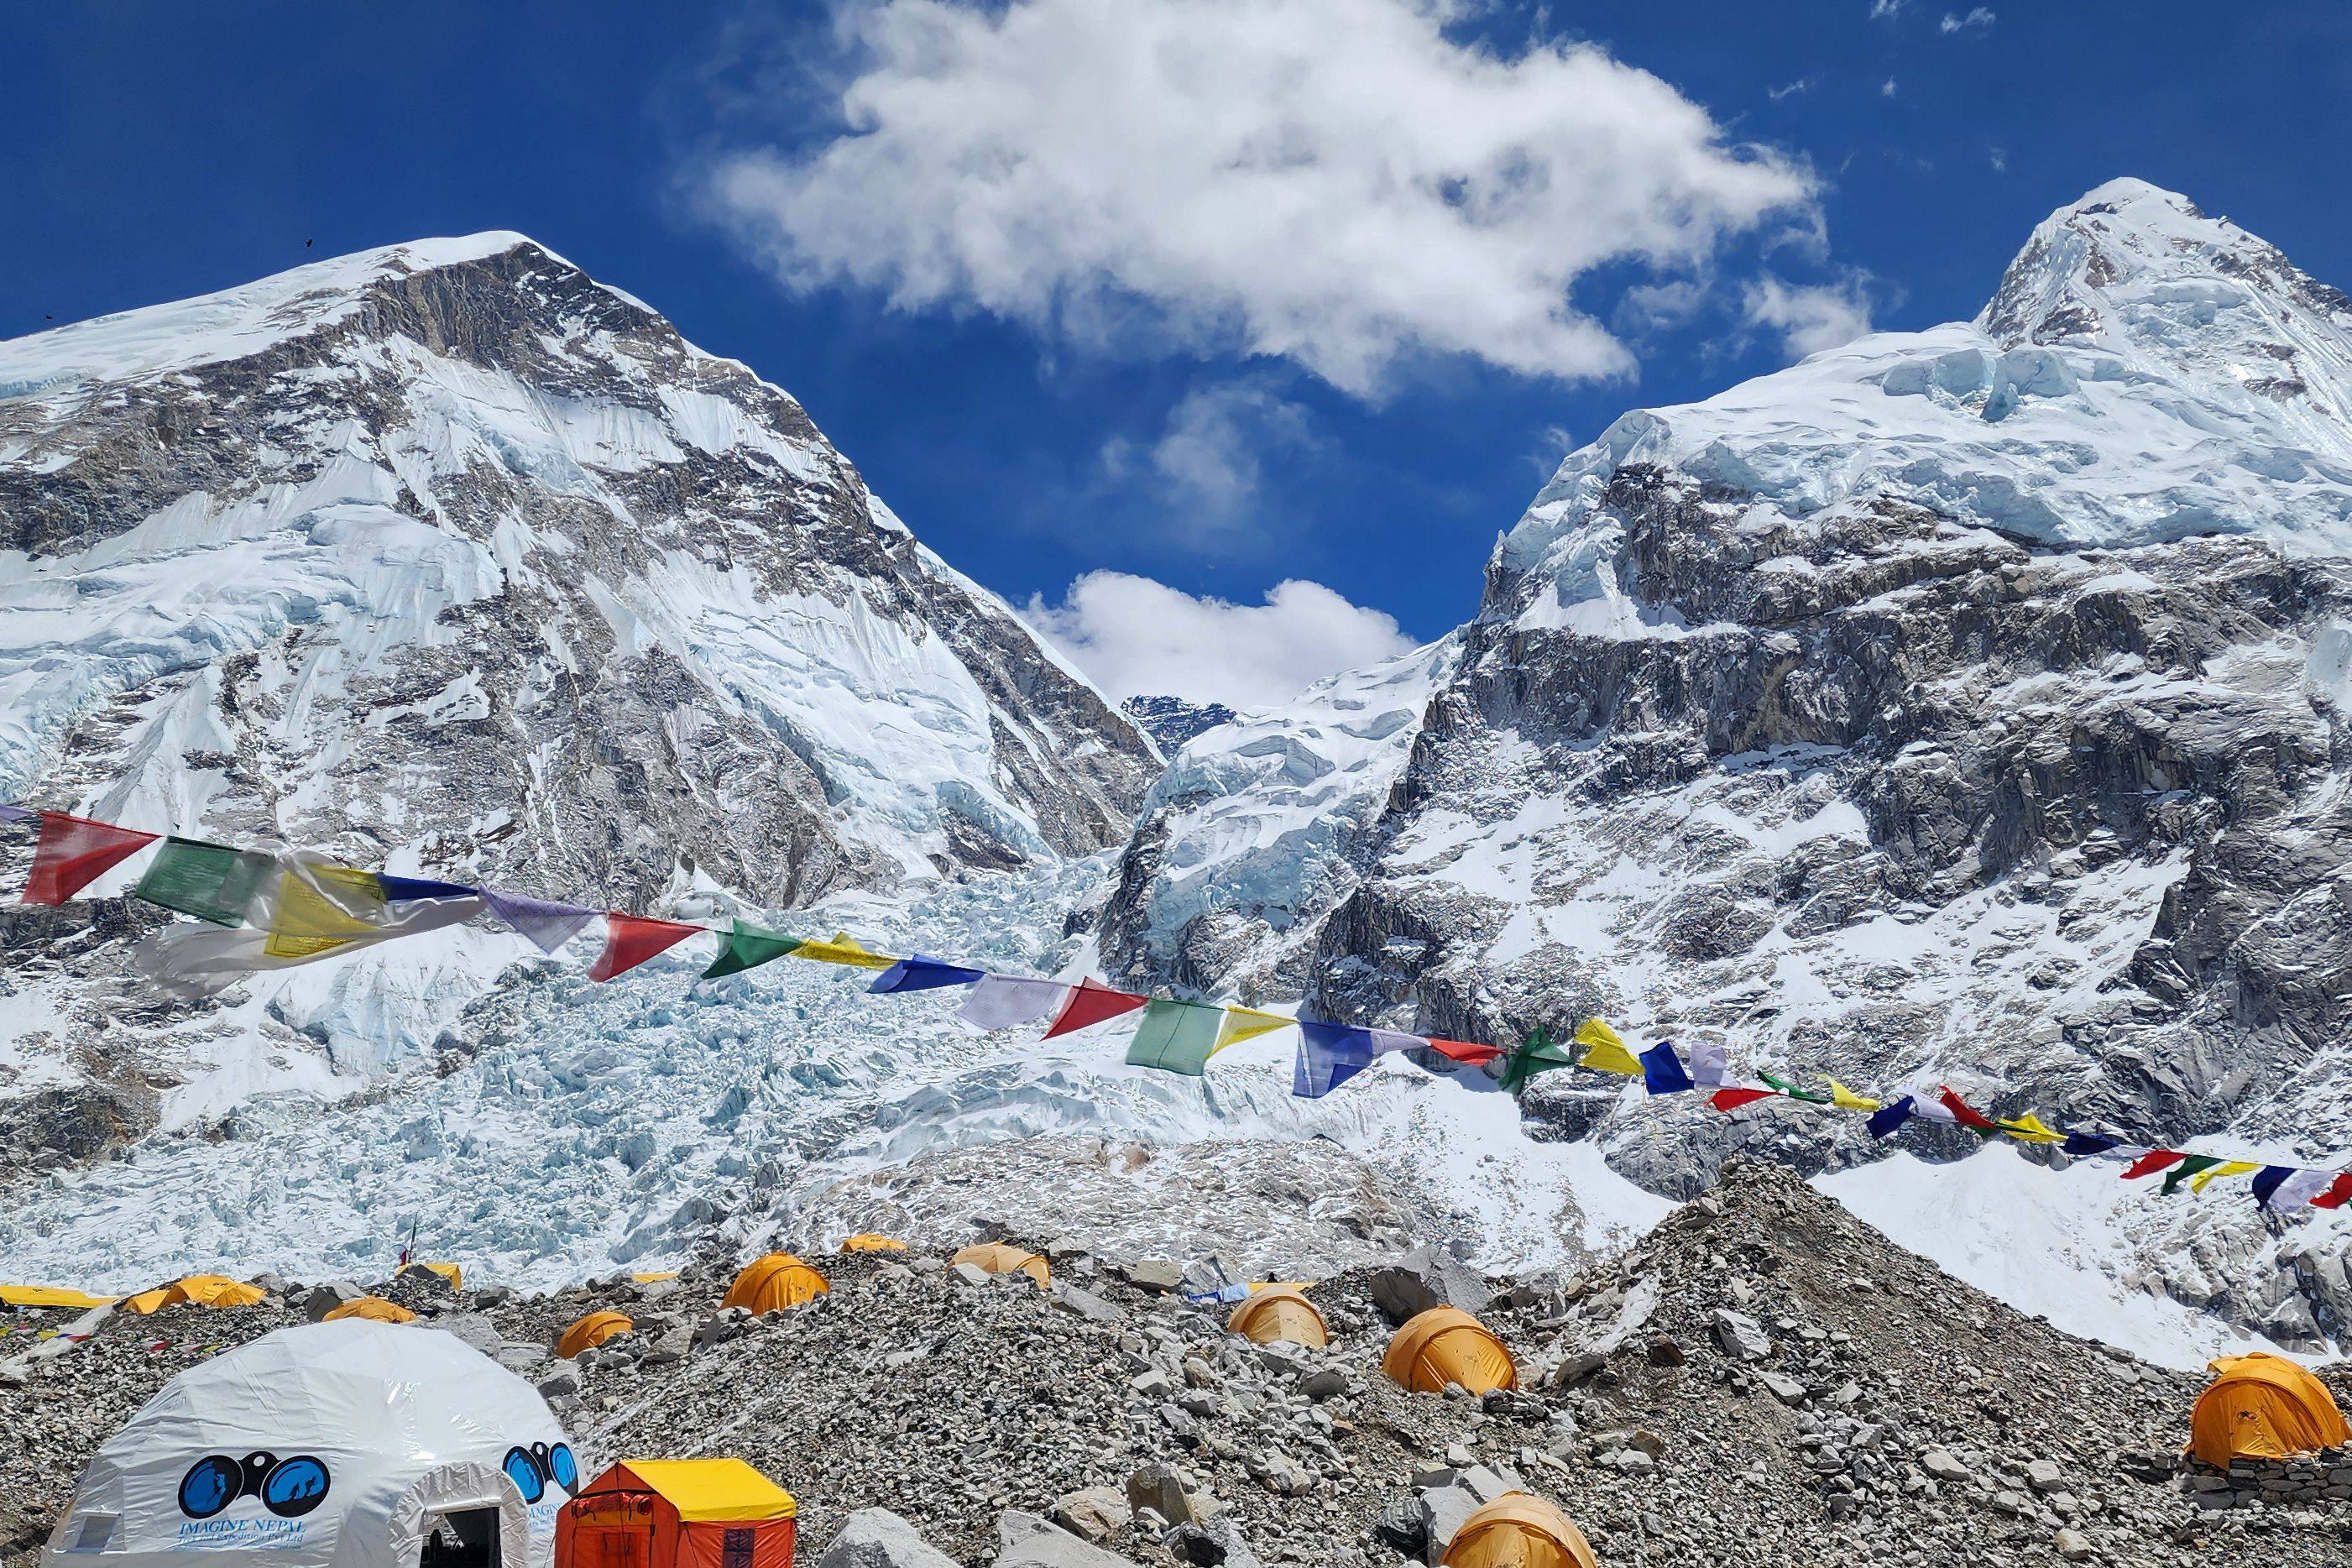 Tents of mountaineers are pictured at the Everest Base Camp. Photo: AFP